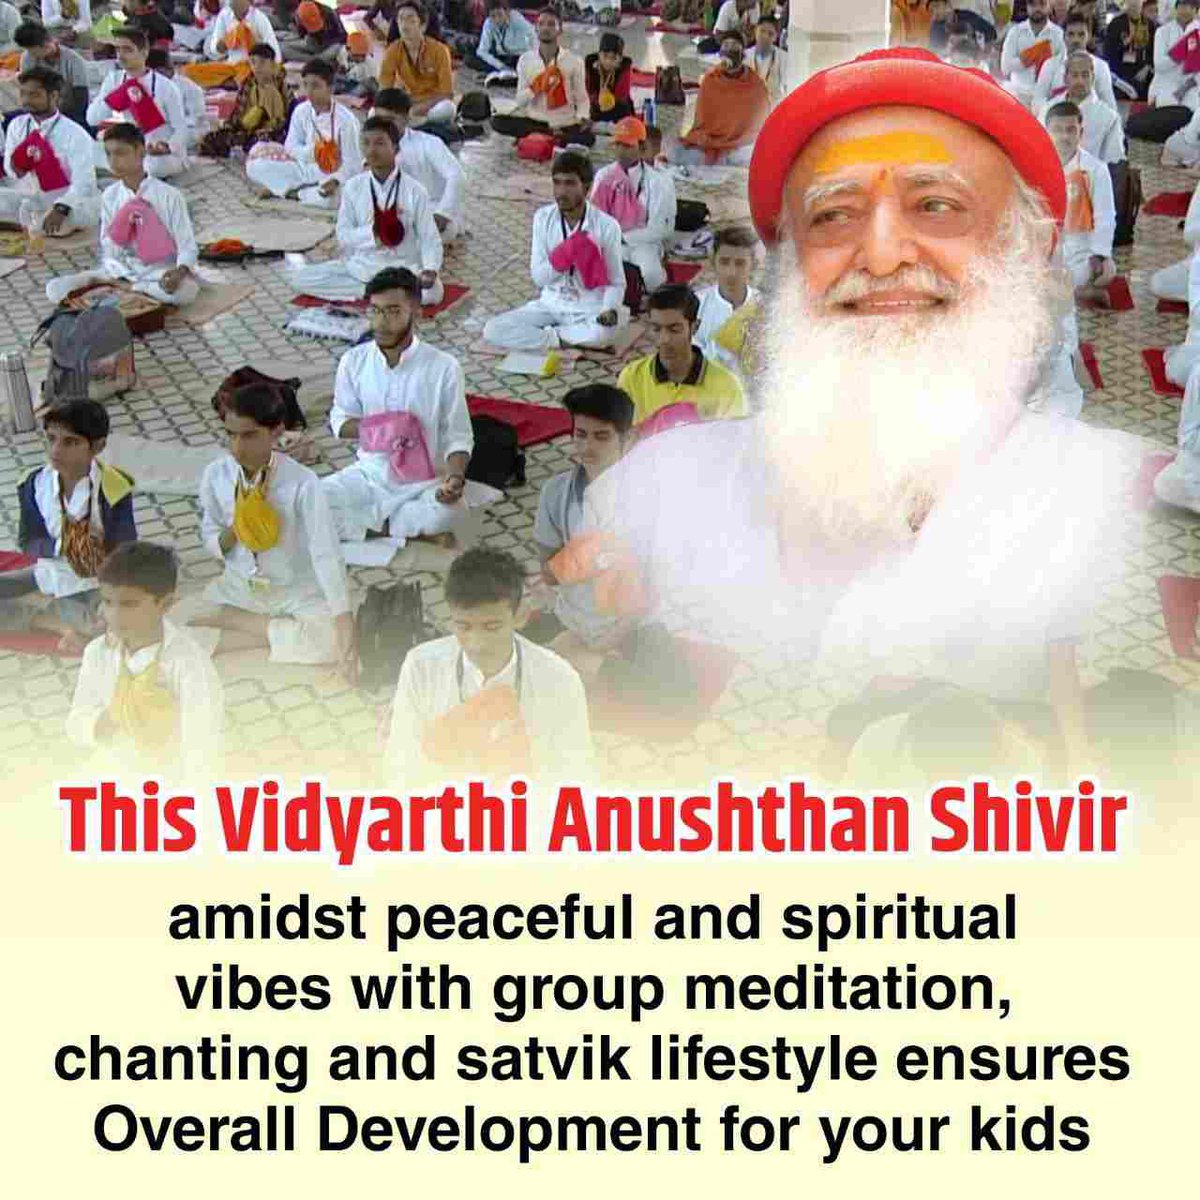 Vidyarthi anushthan shivir is being
organized by Sant Shri Asharamji Ashram from May 8th to 14th.

This is about fostering children's Spiritual and Mental Growth to ensure their holistic development.

Summer Vacation 
#NurturingLittleMinds